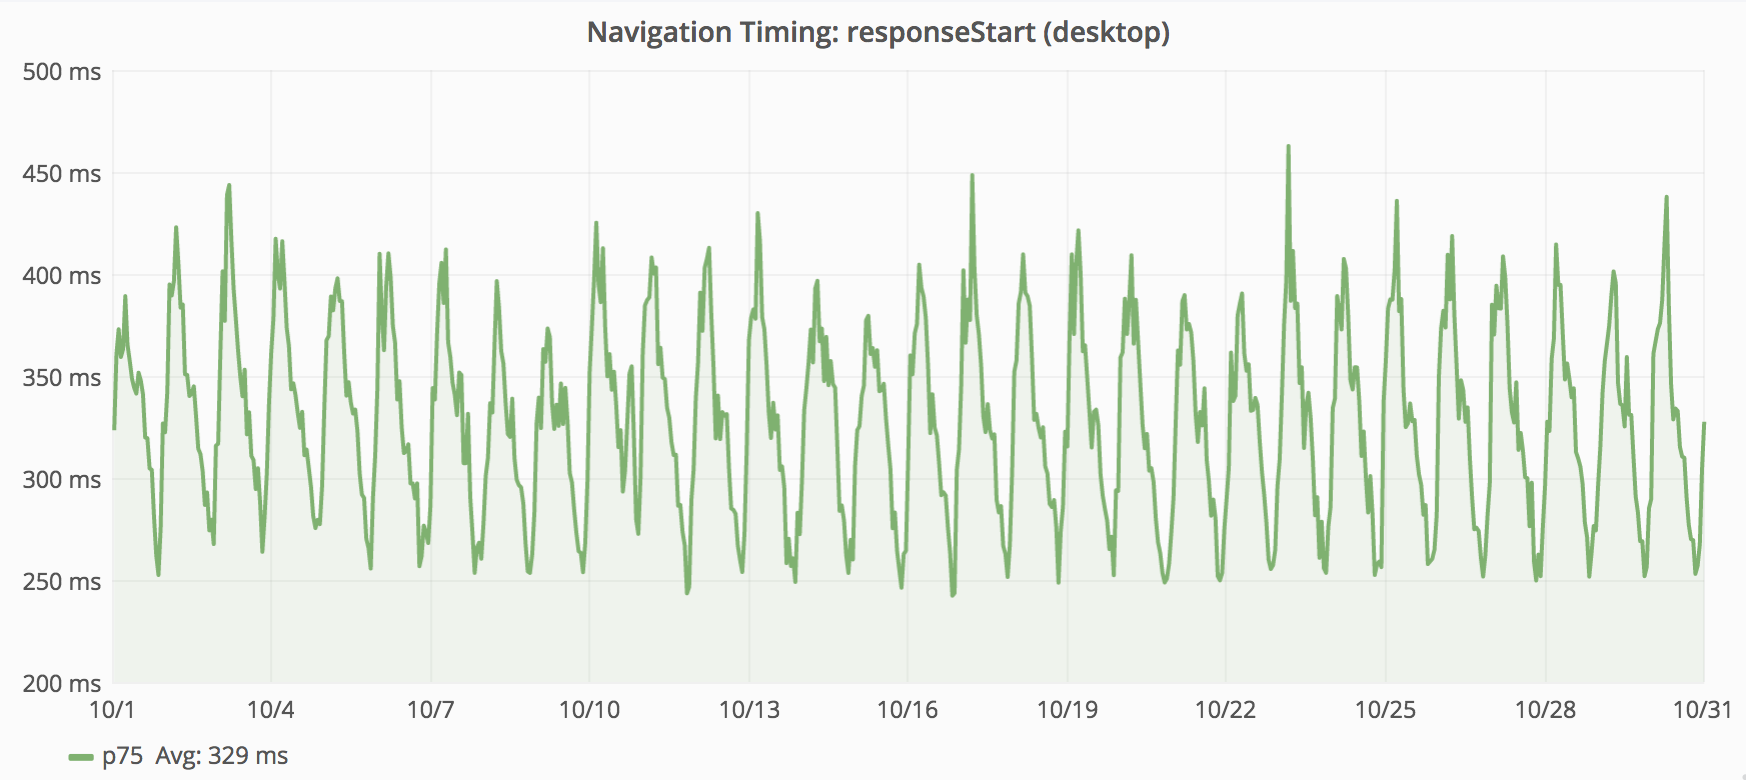 Line graph for responseStart metric from desktop pageviews. Values range from 250ms to 450ms. Averaging around 330ms.